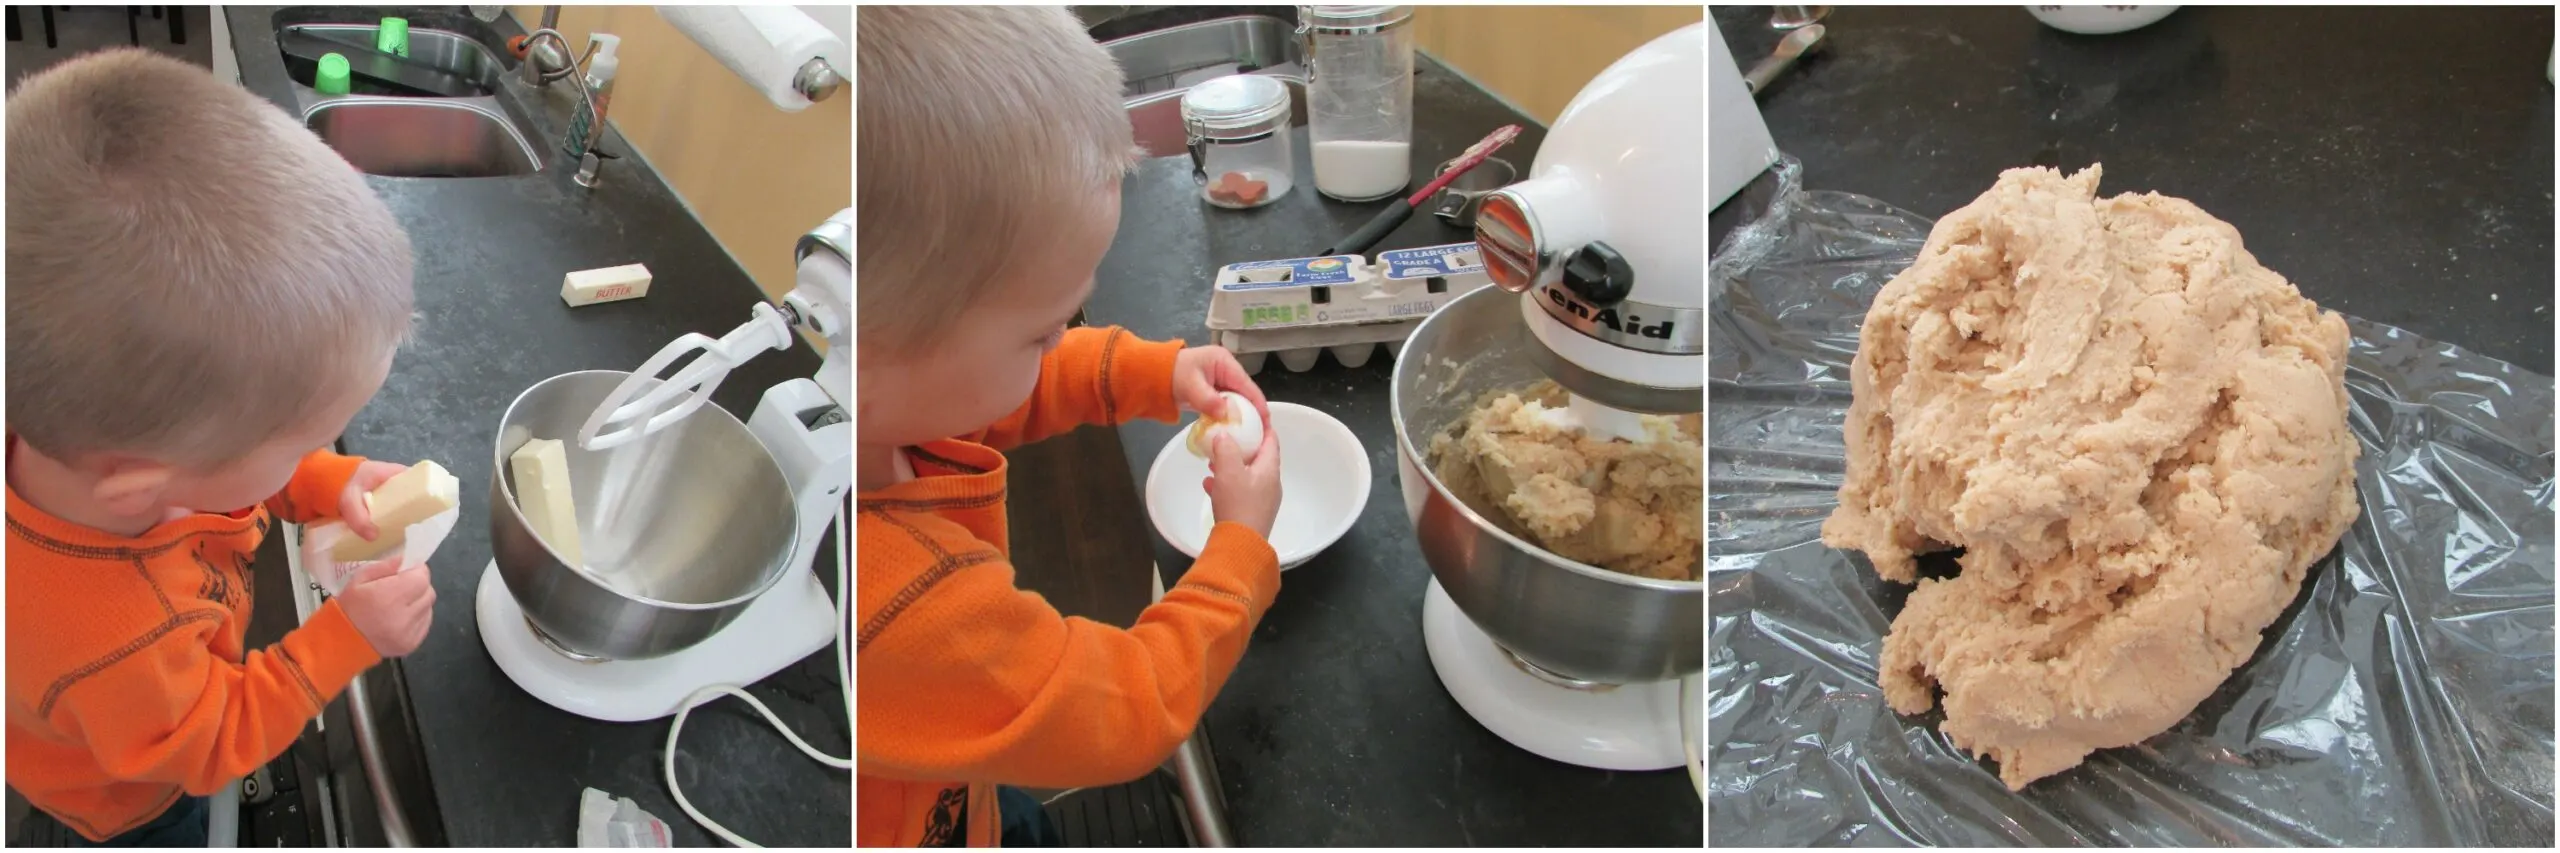 Collage of step by step images of small child making cookie dough in mixer.